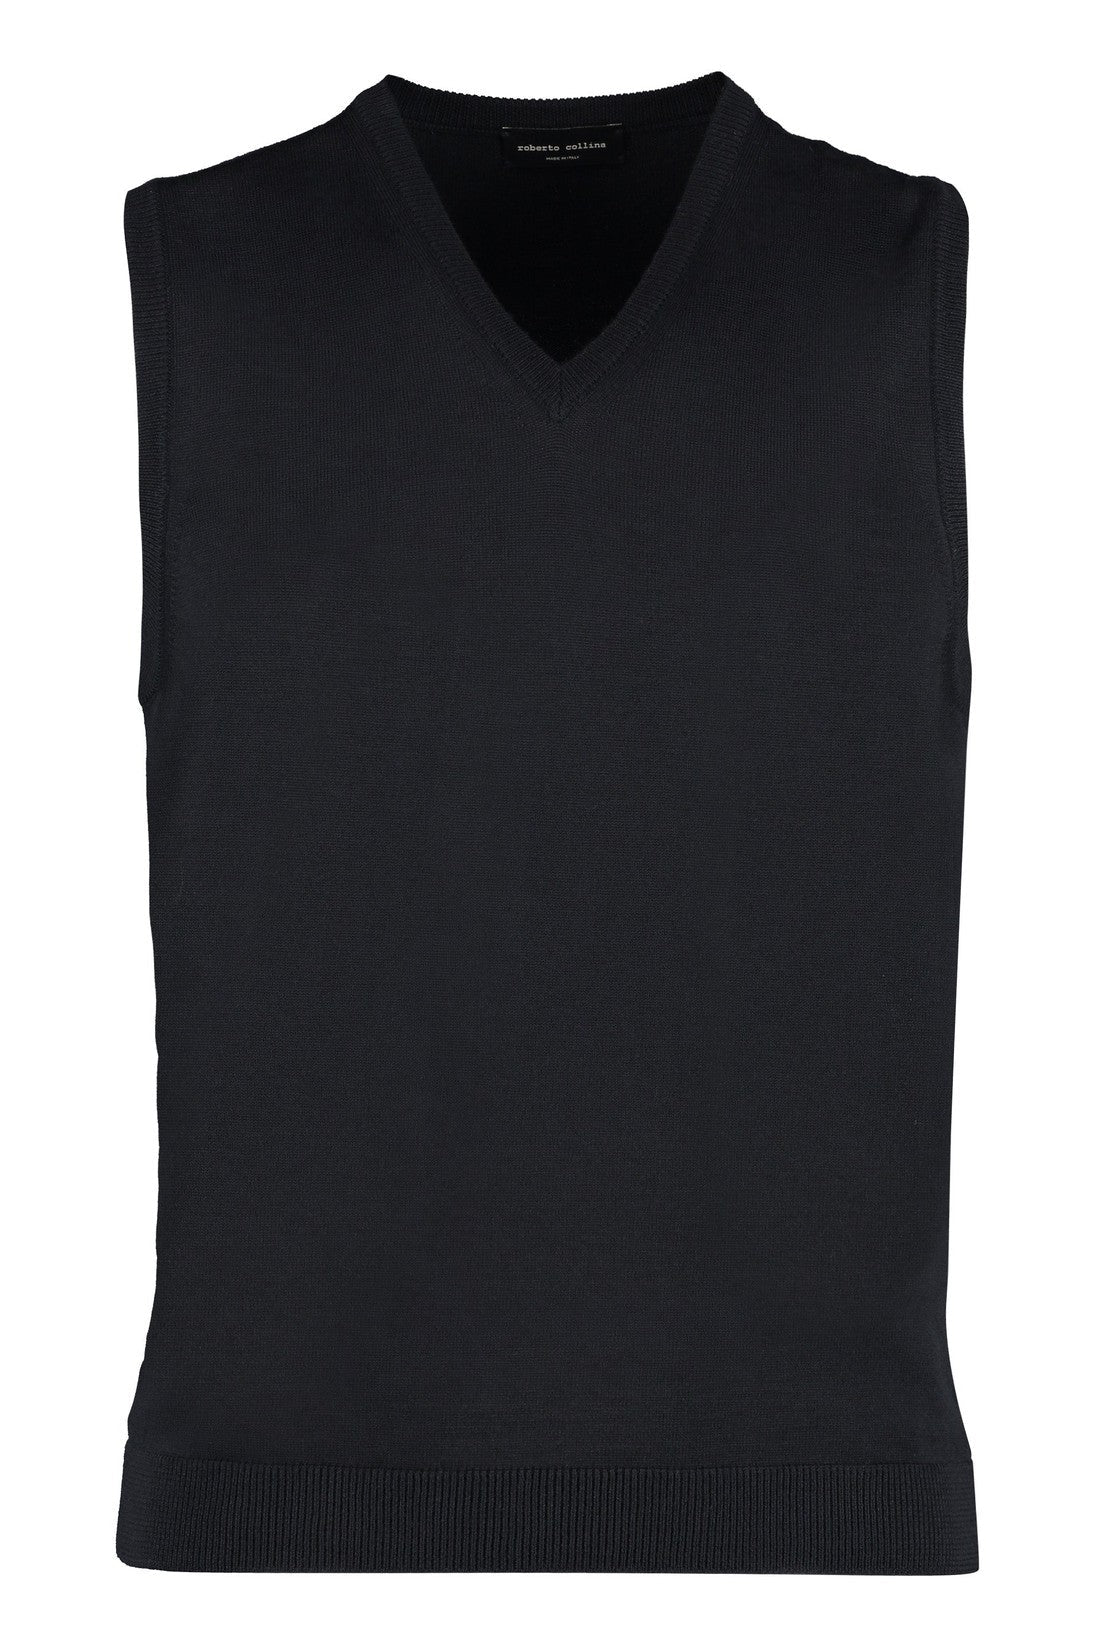 Roberto Collina-OUTLET-SALE-Knitted wool vest-ARCHIVIST